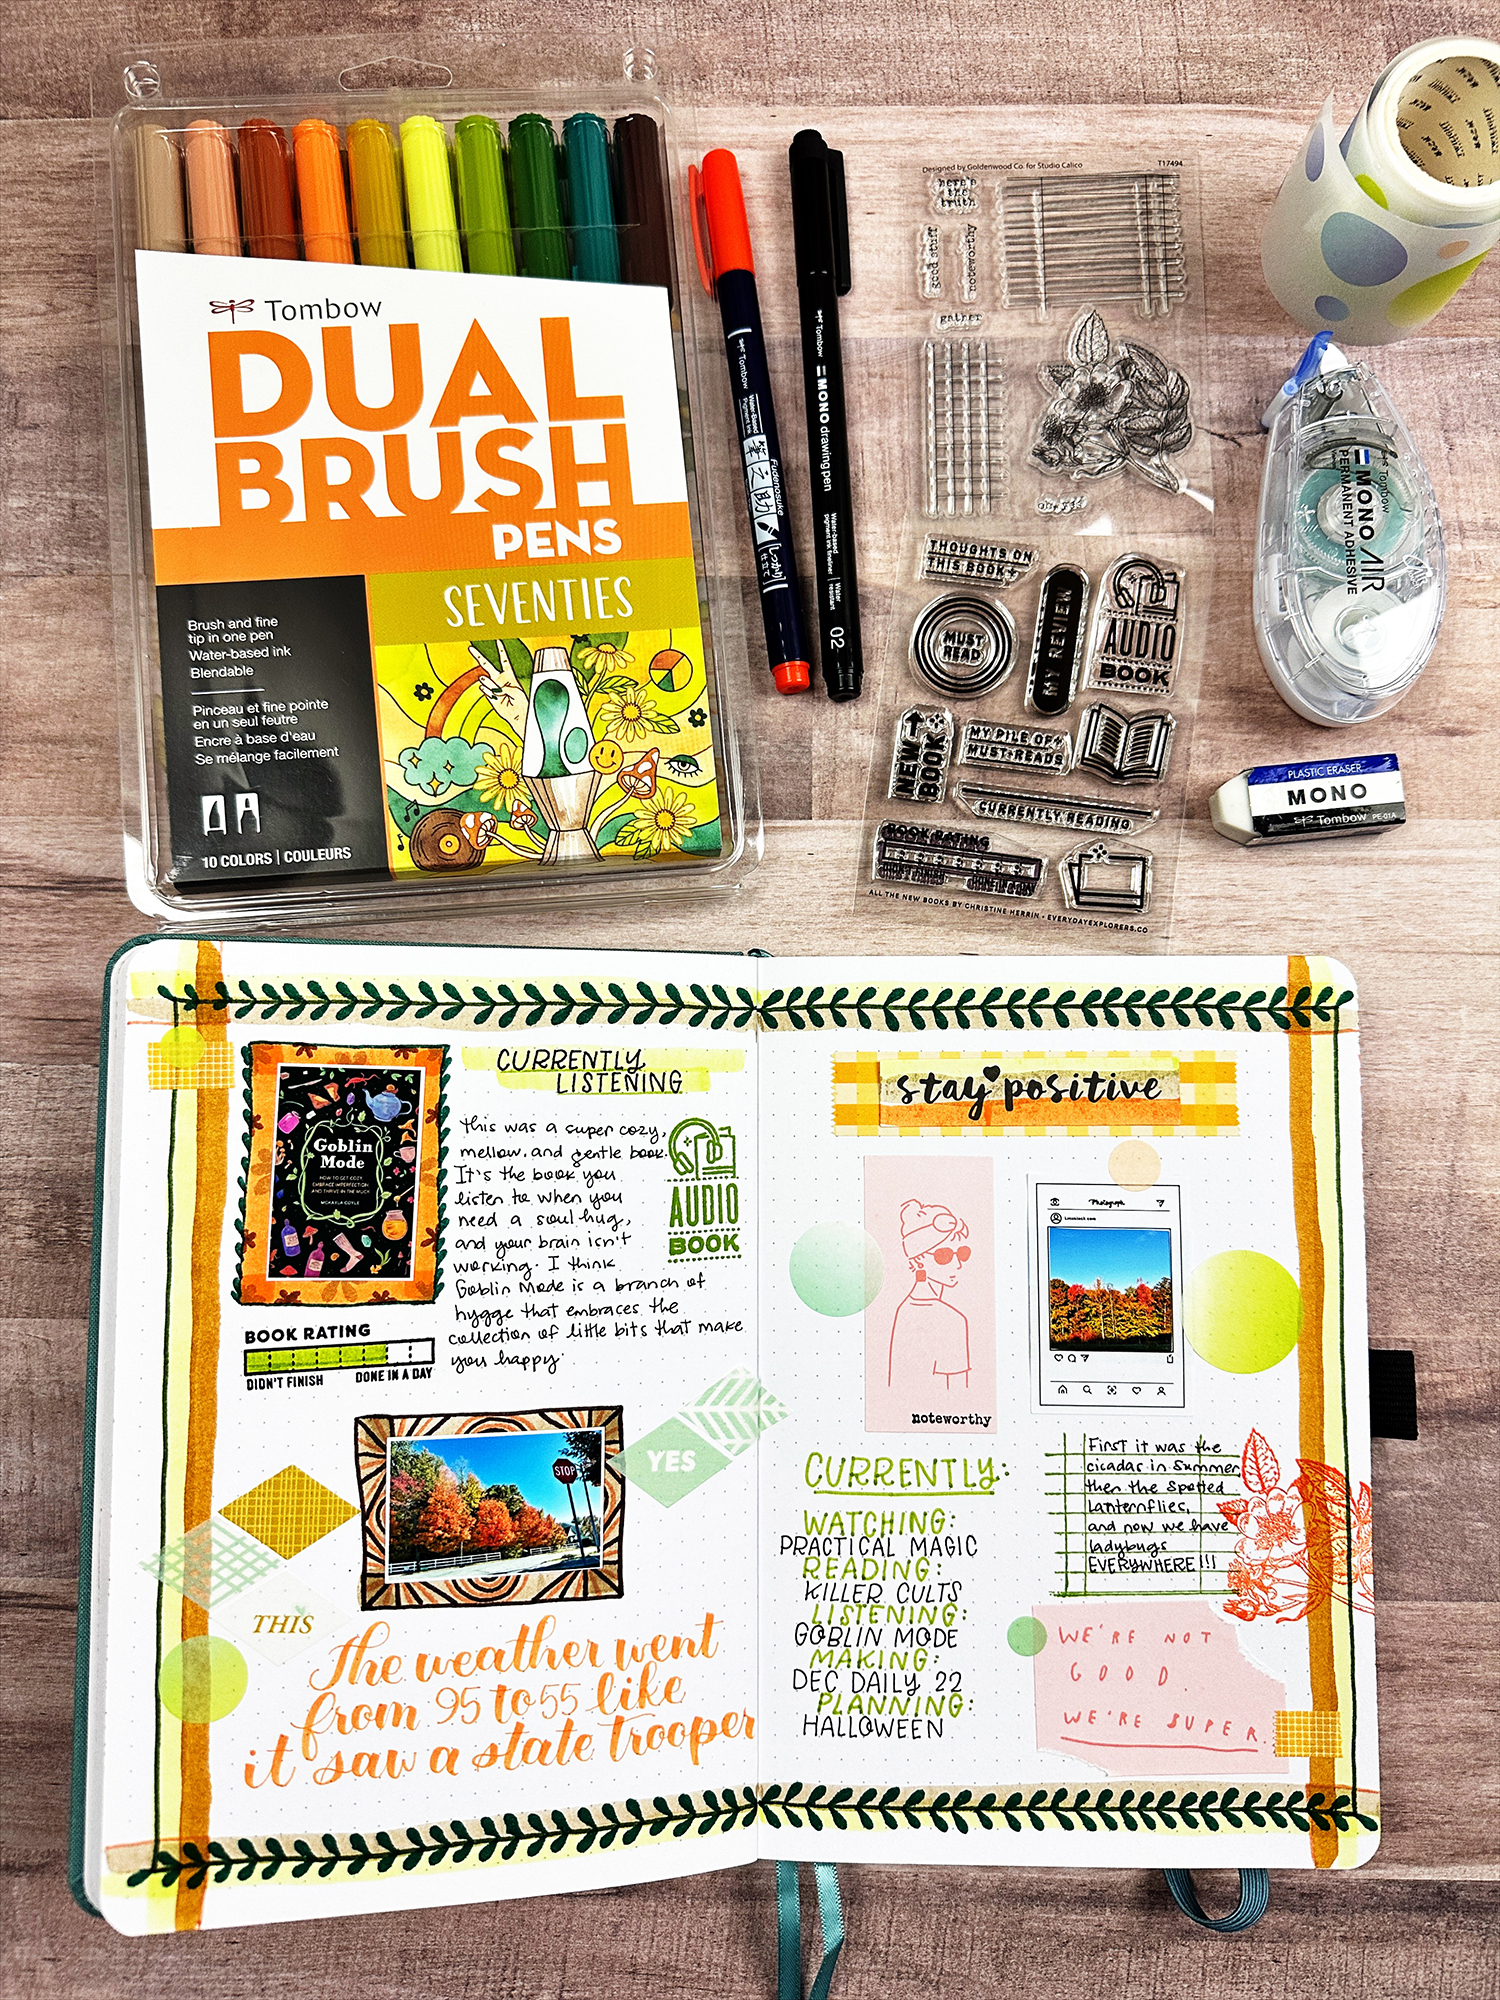 Don't be afraid to break out that new nice journal that you planned to hoard until next year. You don't need a date to begin like a planner. Joyful journaling can start today! #tombow #journaling